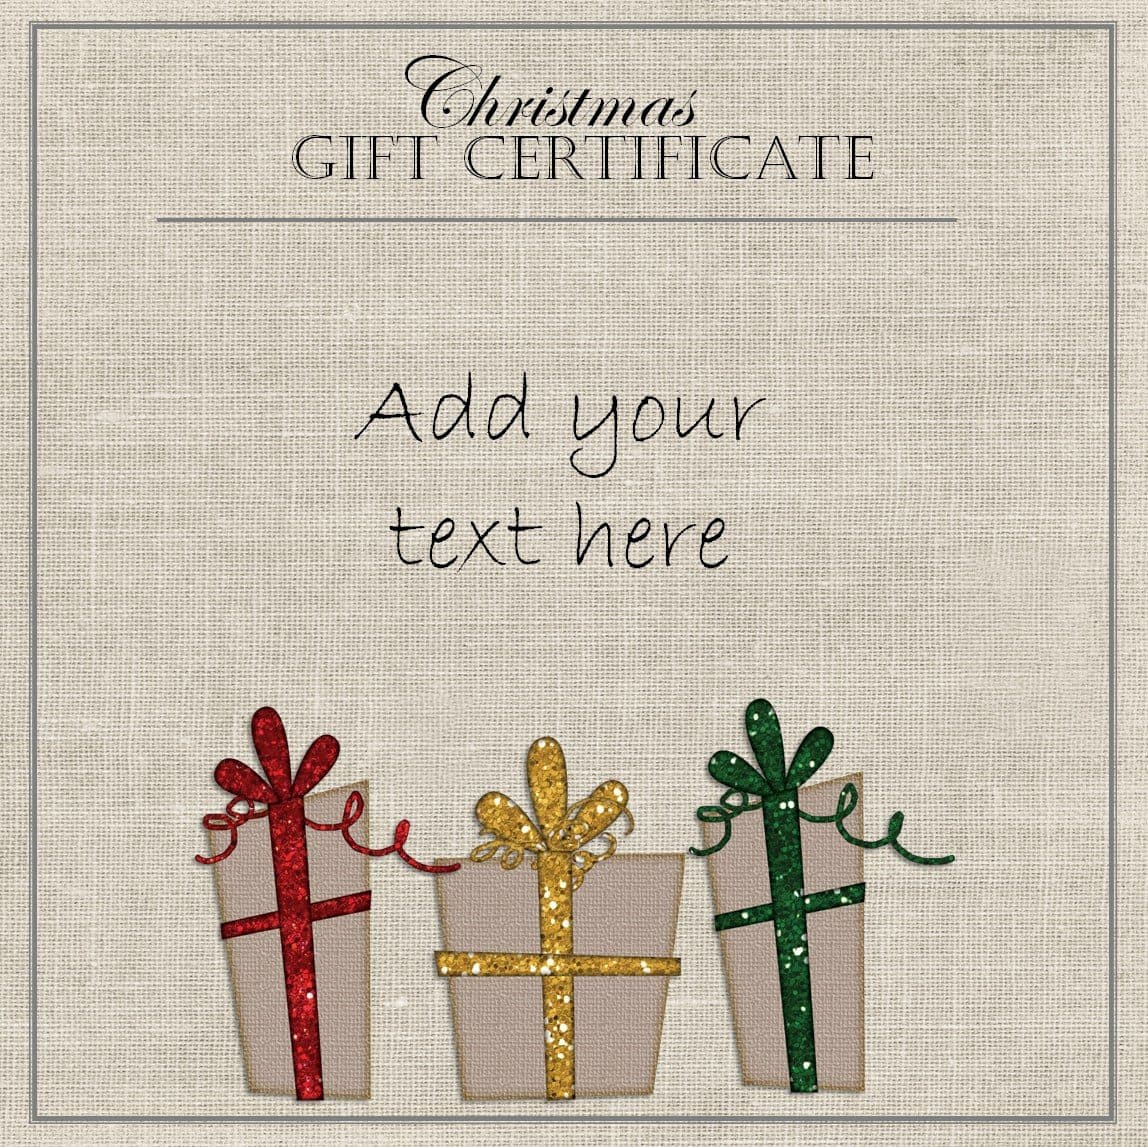 Free Christmas Gift Certificate Template Customize Online Download